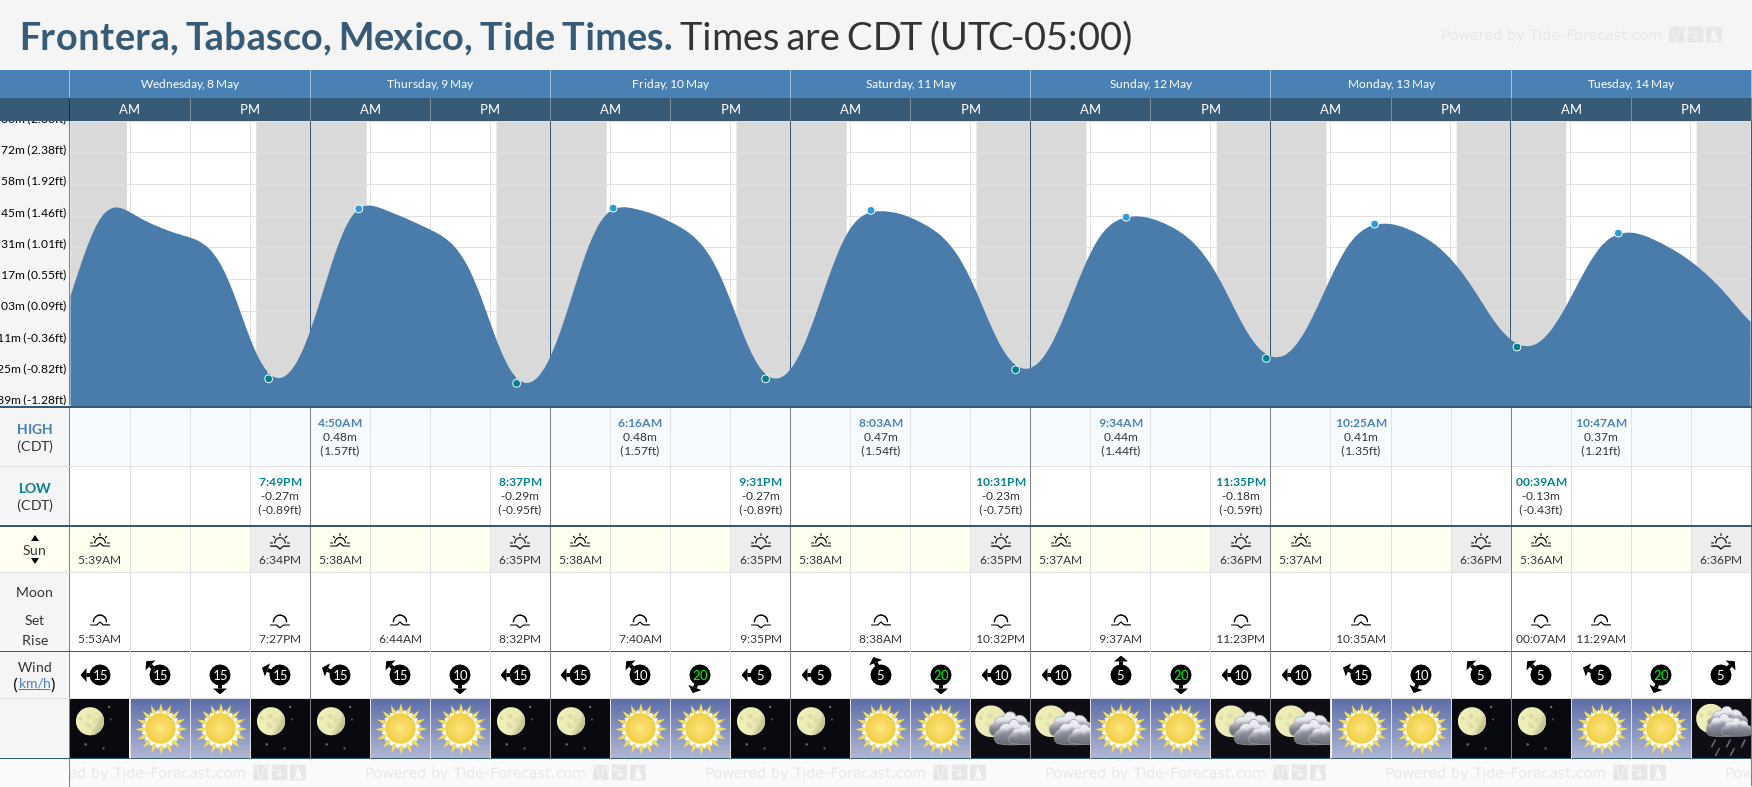 Frontera, Tabasco, Mexico Tide Chart including high and low tide tide times for the next 7 days